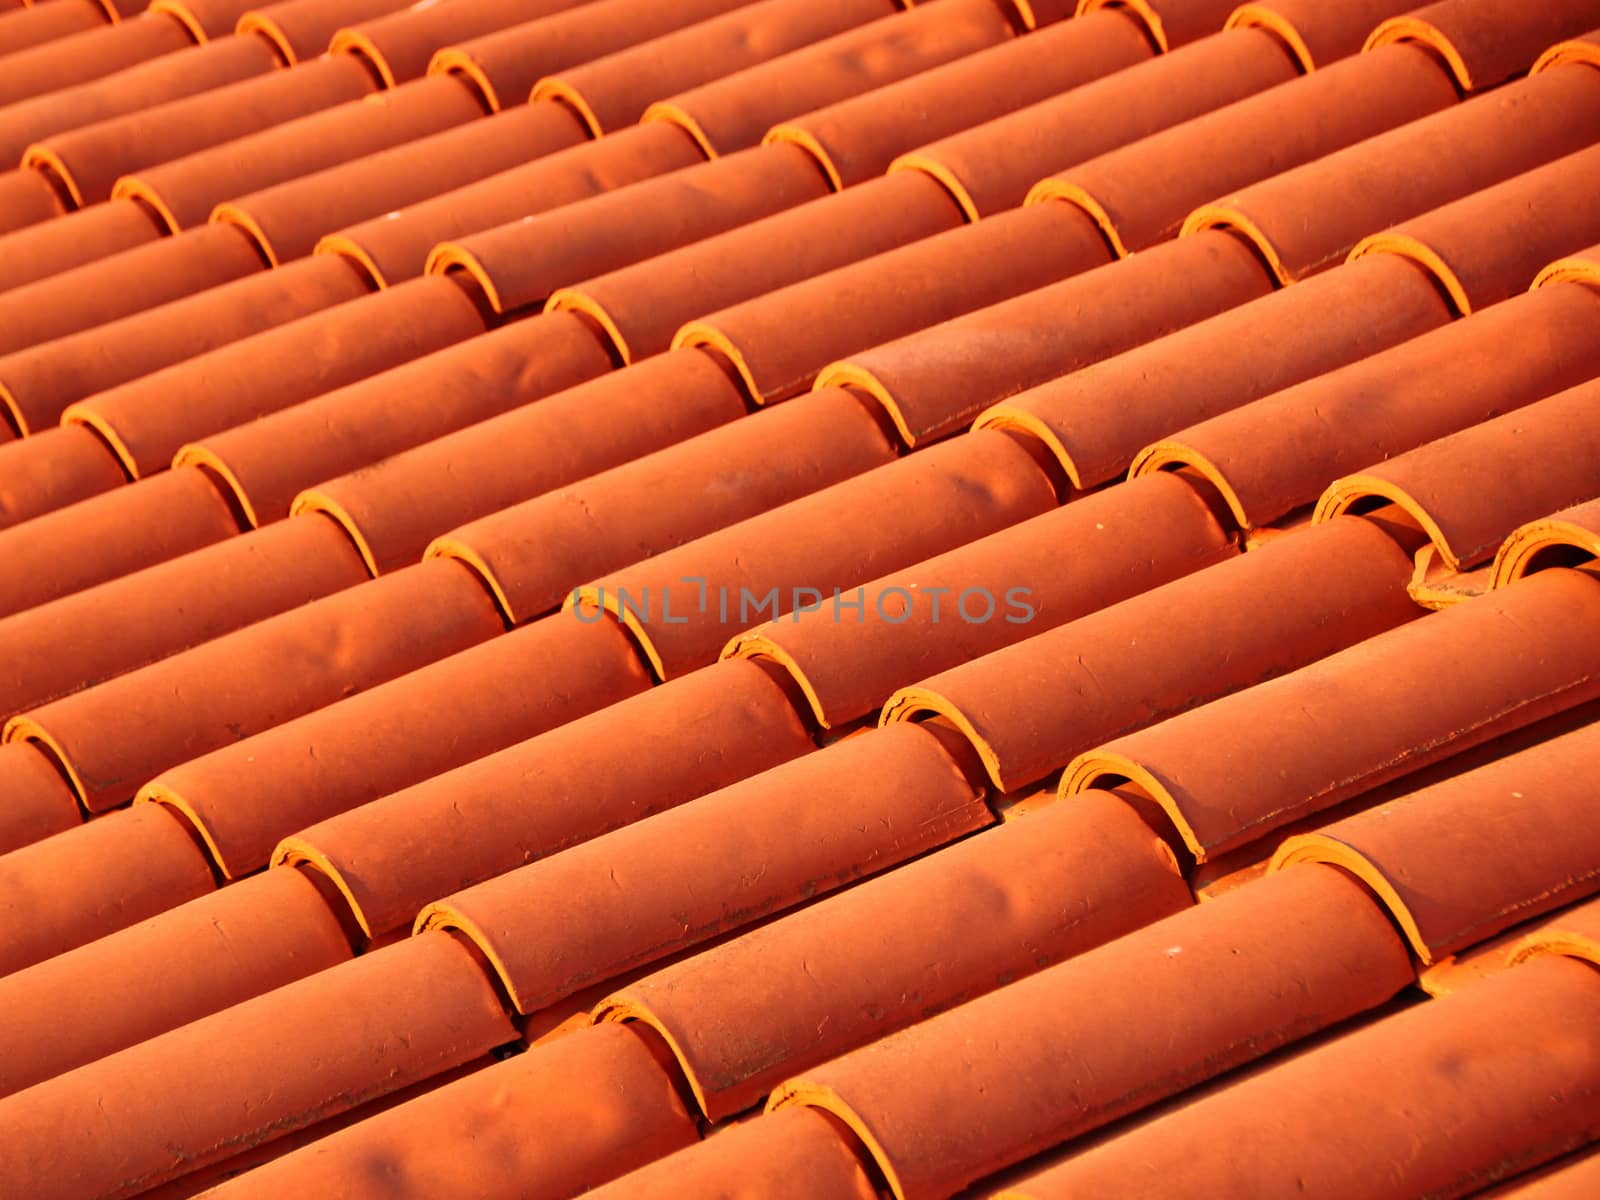 New Tile Brick Roof in Red Colors by HoleInTheBox